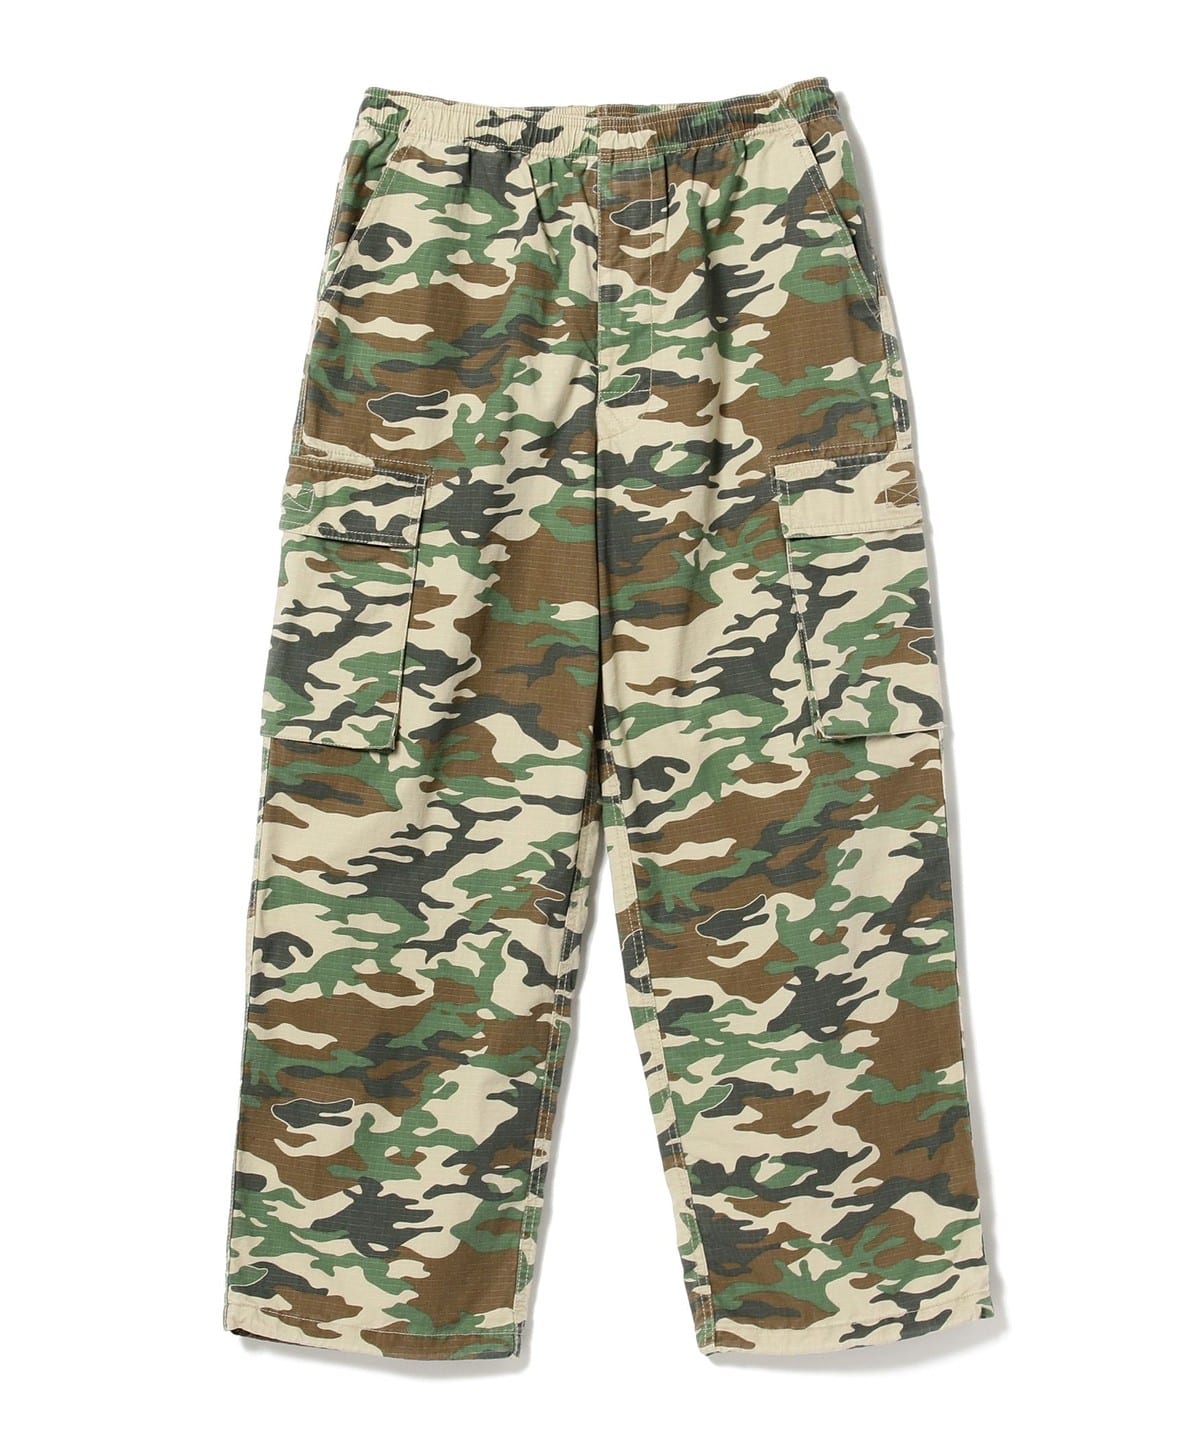 BEAMS FUTURE ARCHIVE / CAMO 6PKT CARGO BEAMS casual pants) mail 